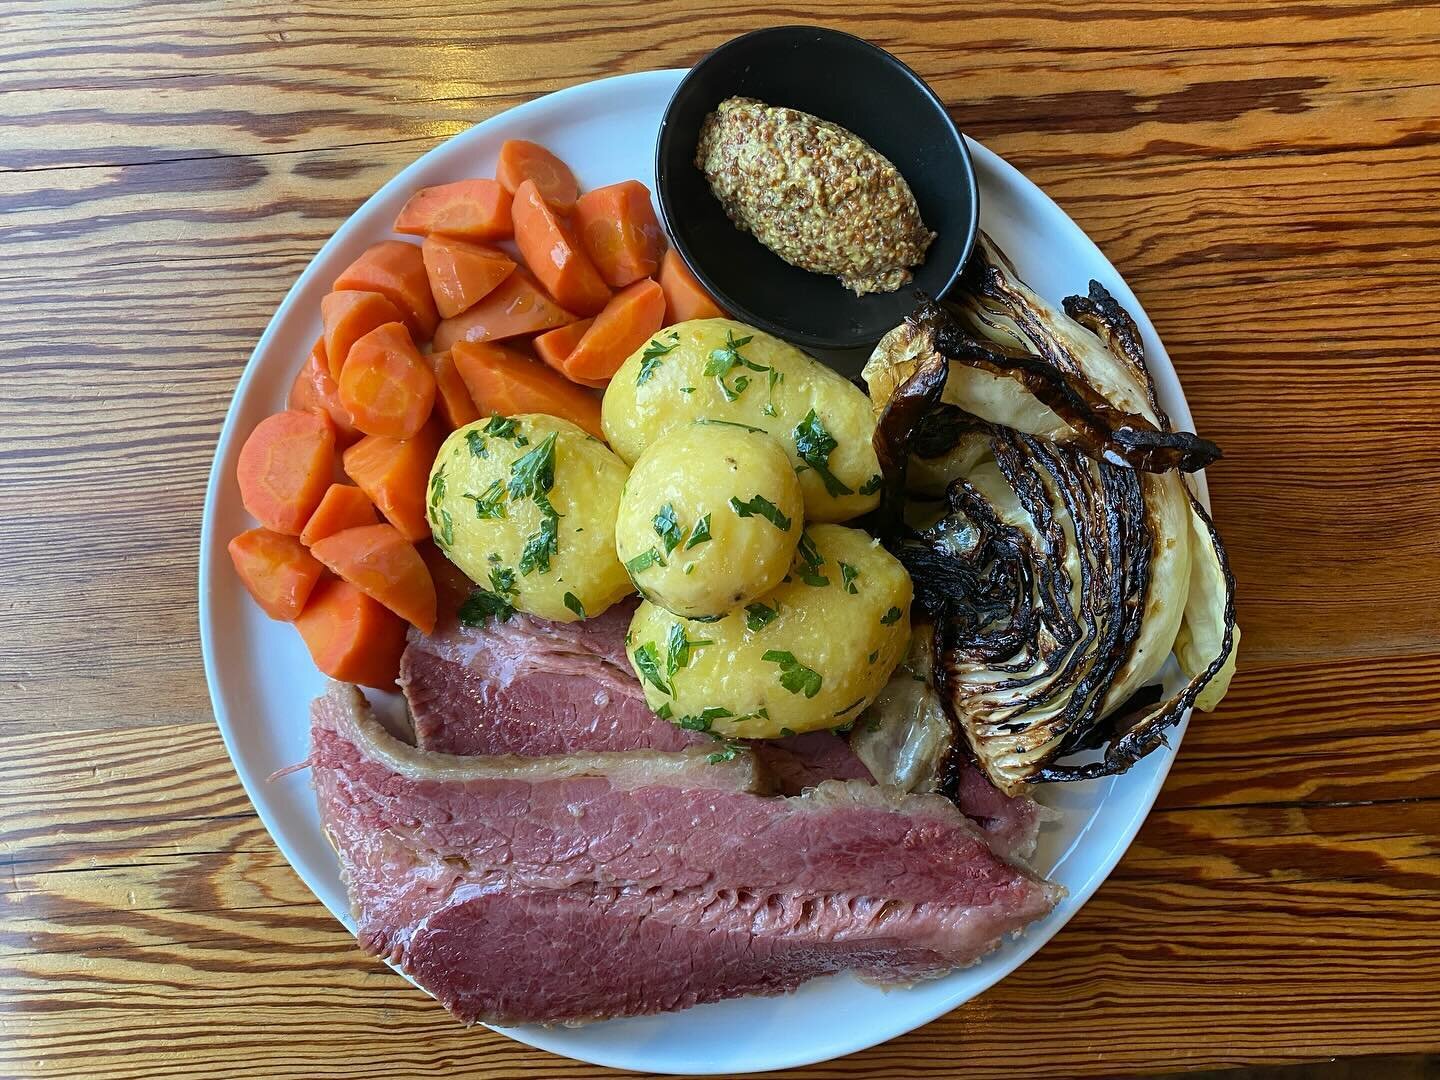 We are pumped for dinner this evening and tomorrow (of course!) we will be serving up hot plates of corned beef (cured 7 days in house), potatoes, roasted cabbage and mustard. It has become one of our signature holiday preparations and we are excited